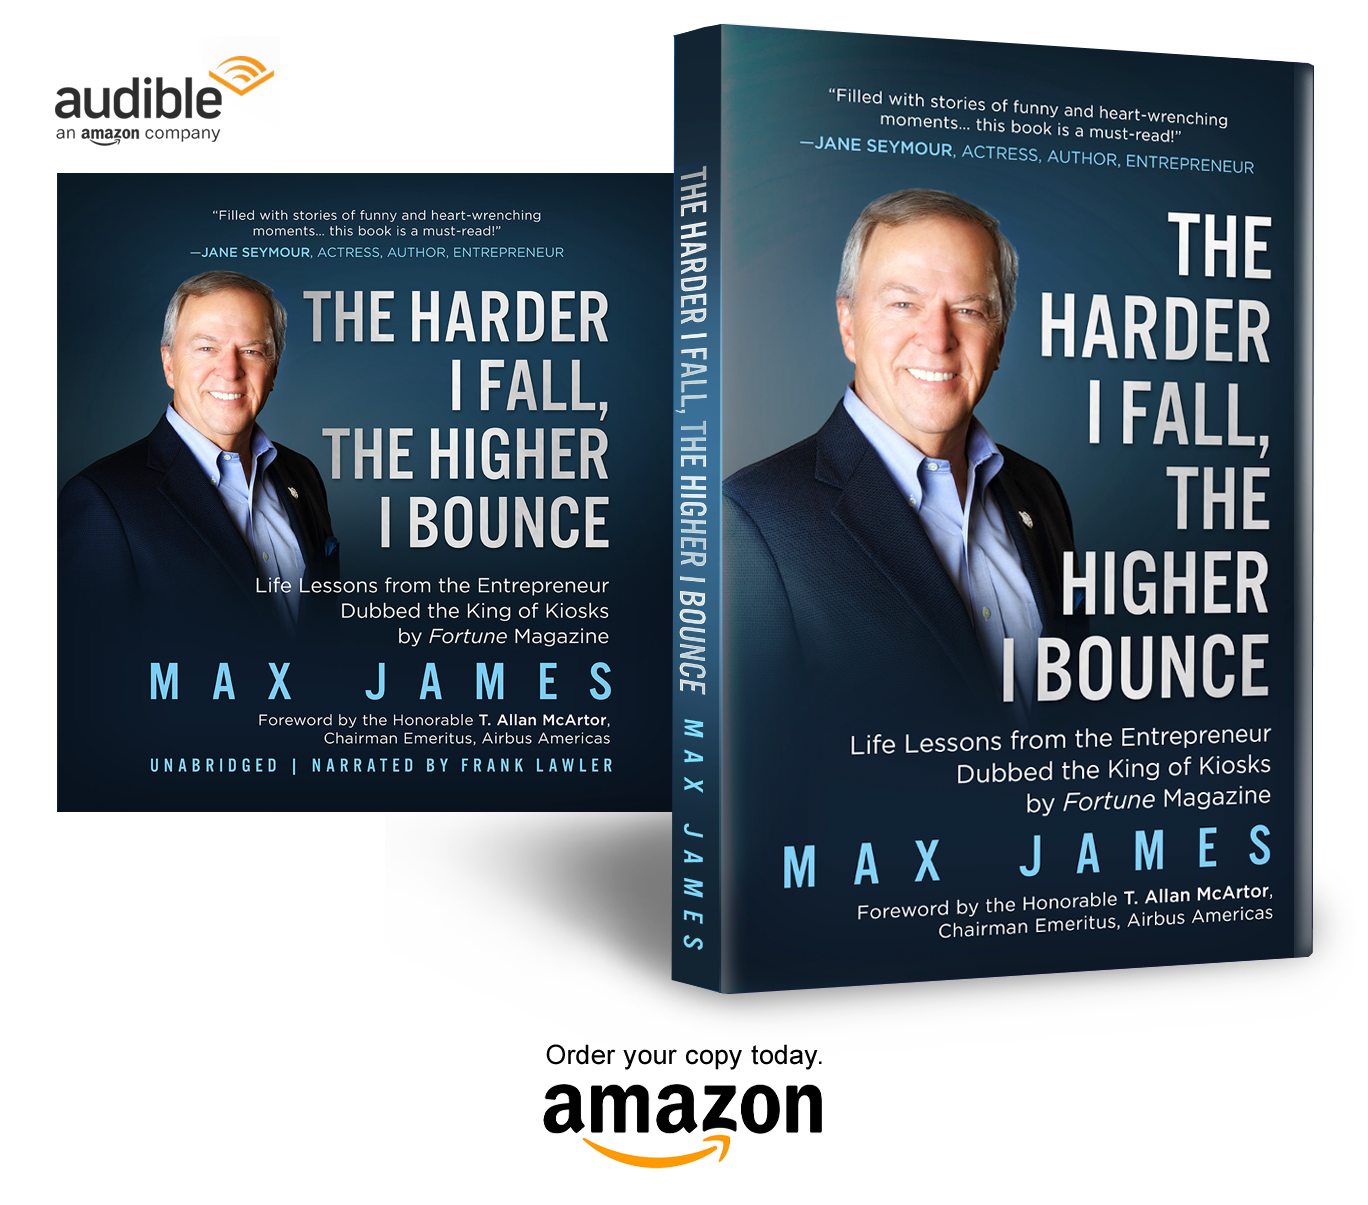 The Harder I Fall, The Higher I Bounce by Max James in both audio and hardback.